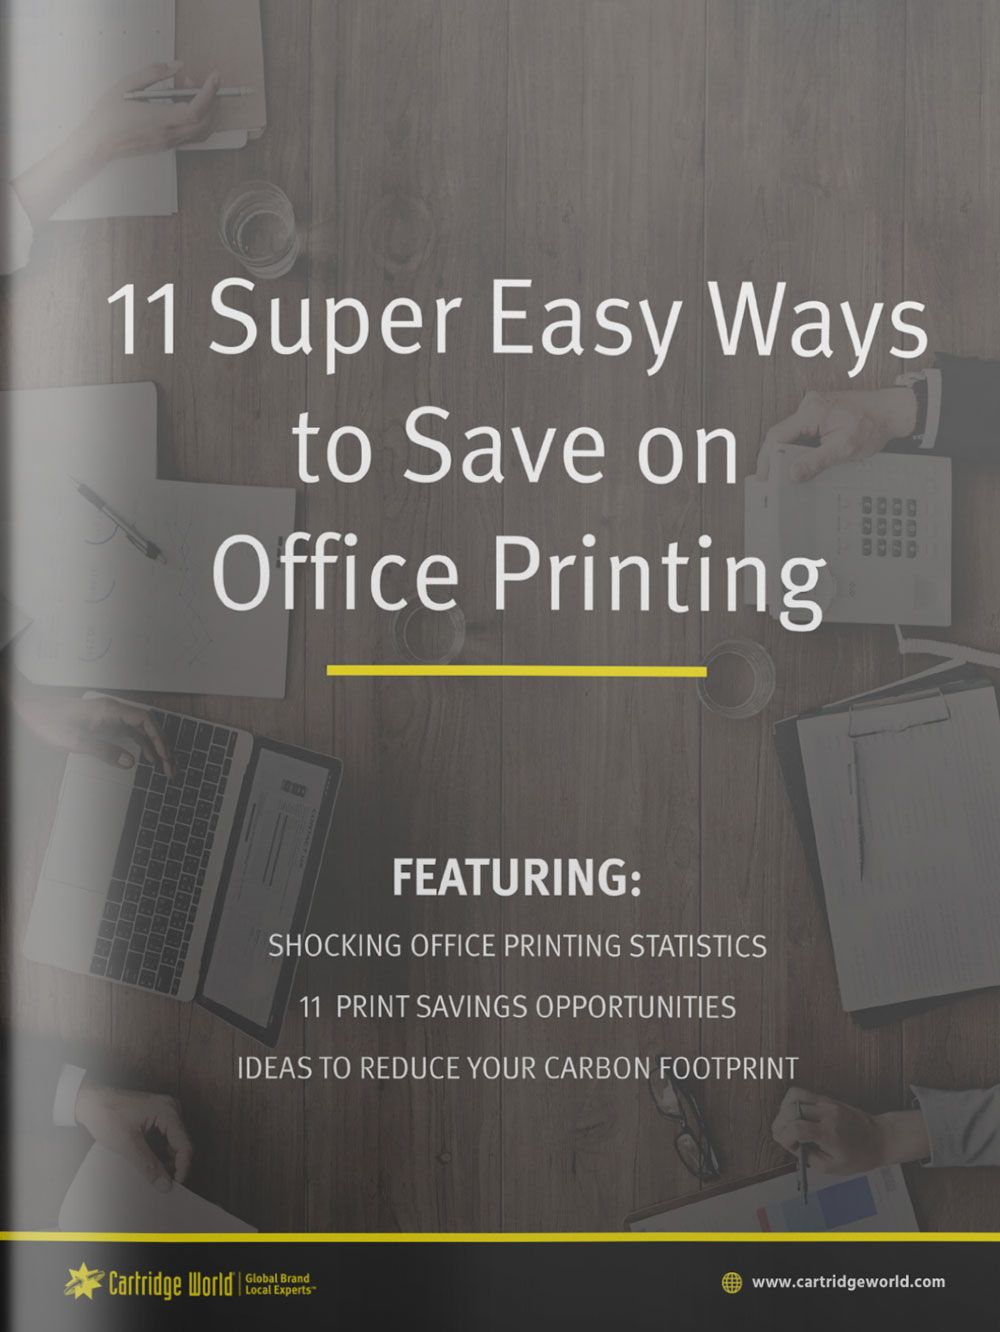 11 Super Easy Ways to Save on Office Printing